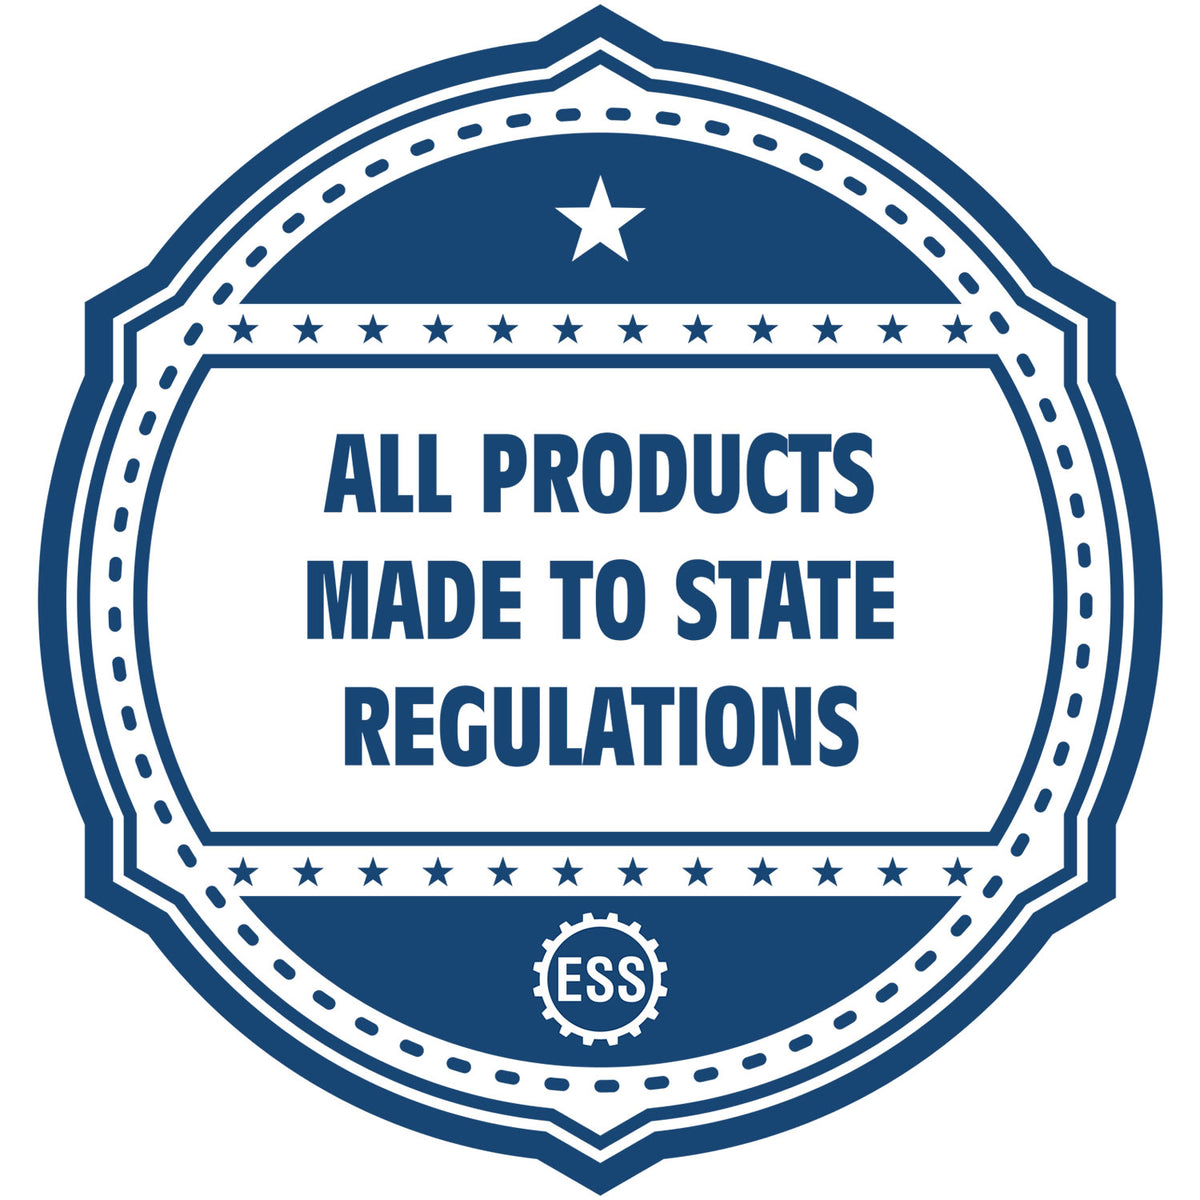 An icon or badge element for the Soft Pocket Maryland Landscape Architect Embosser showing that this product is made in compliance with state regulations.